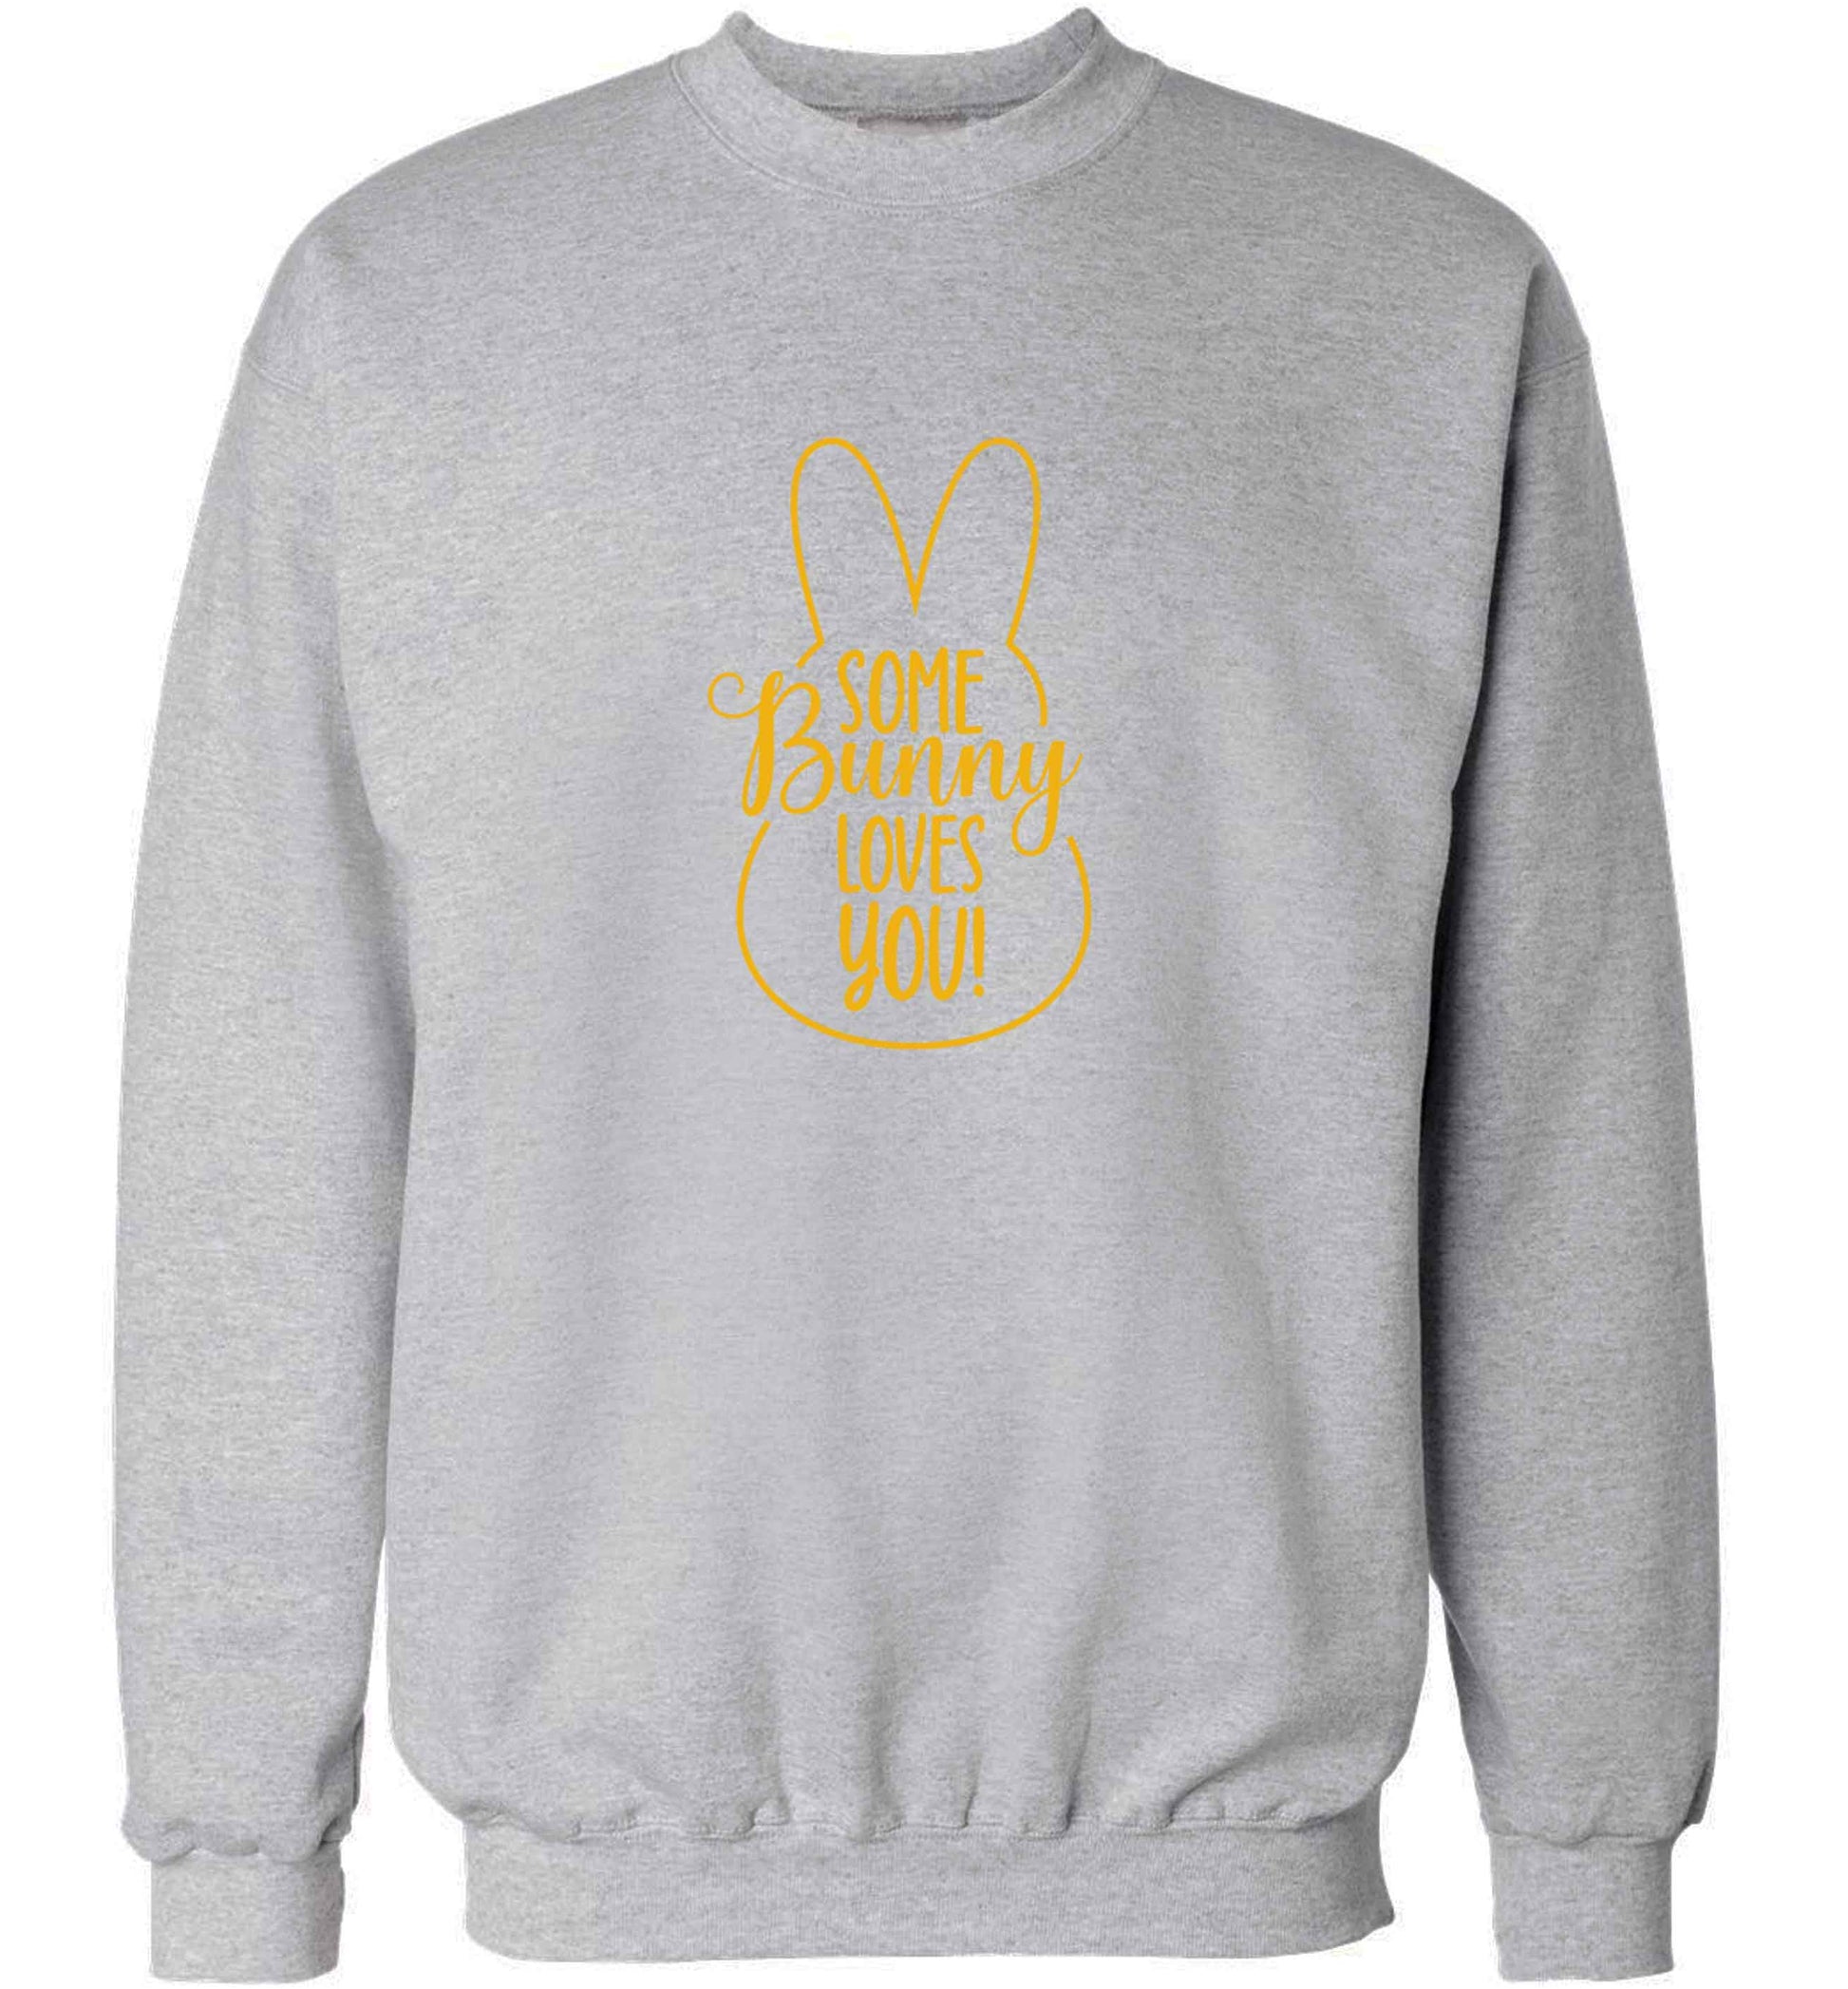 Some bunny loves you adult's unisex grey sweater 2XL